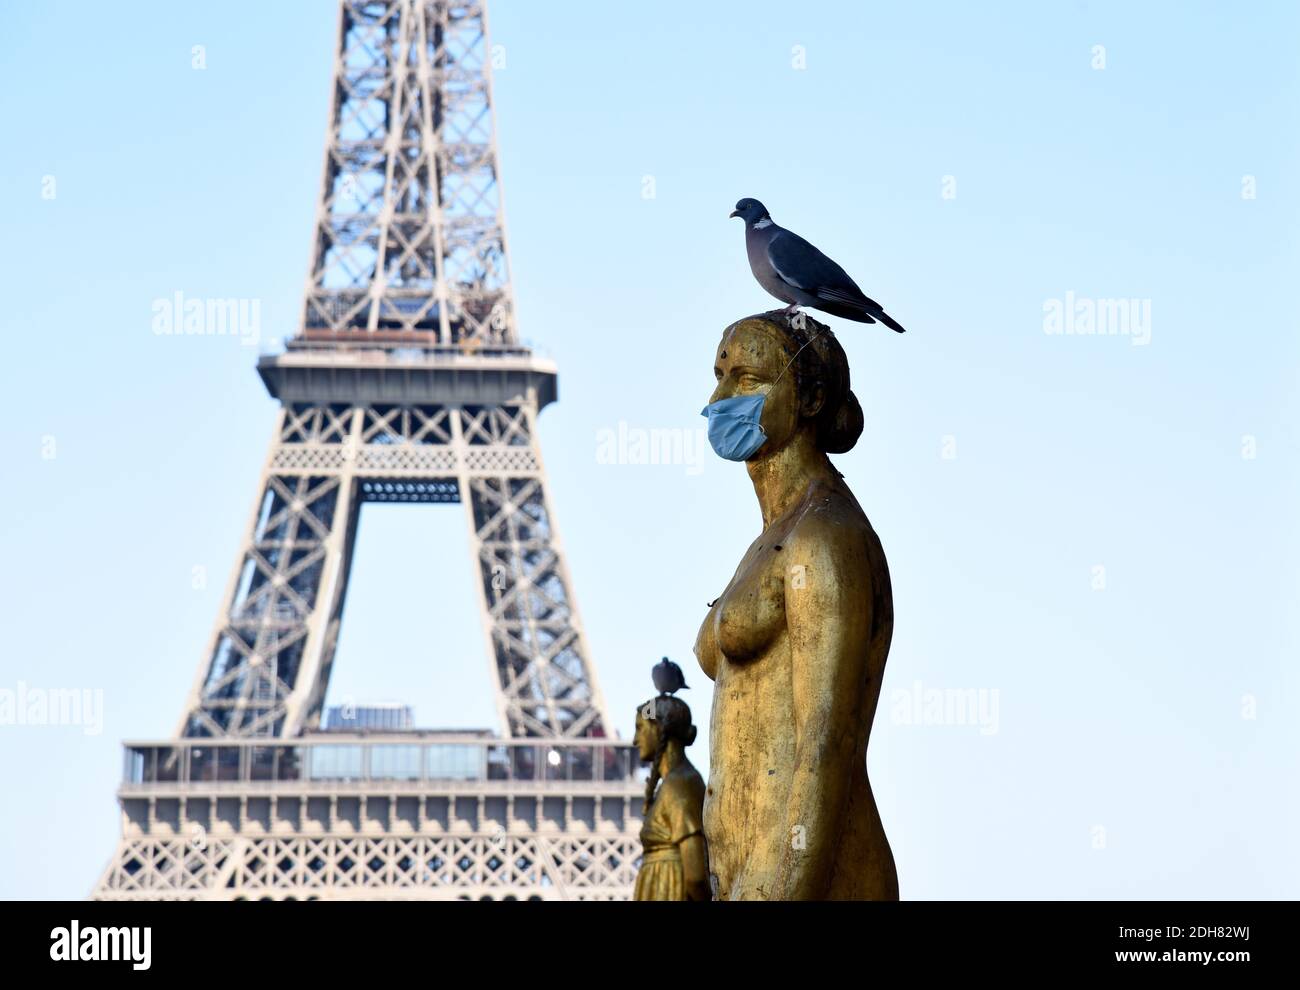 Paris (France) on May 17, 2020: statue in 'Place du Trocadero' square with a protective mask against Coronavirus, Covid19, and the Eiffel Tower in the Stock Photo